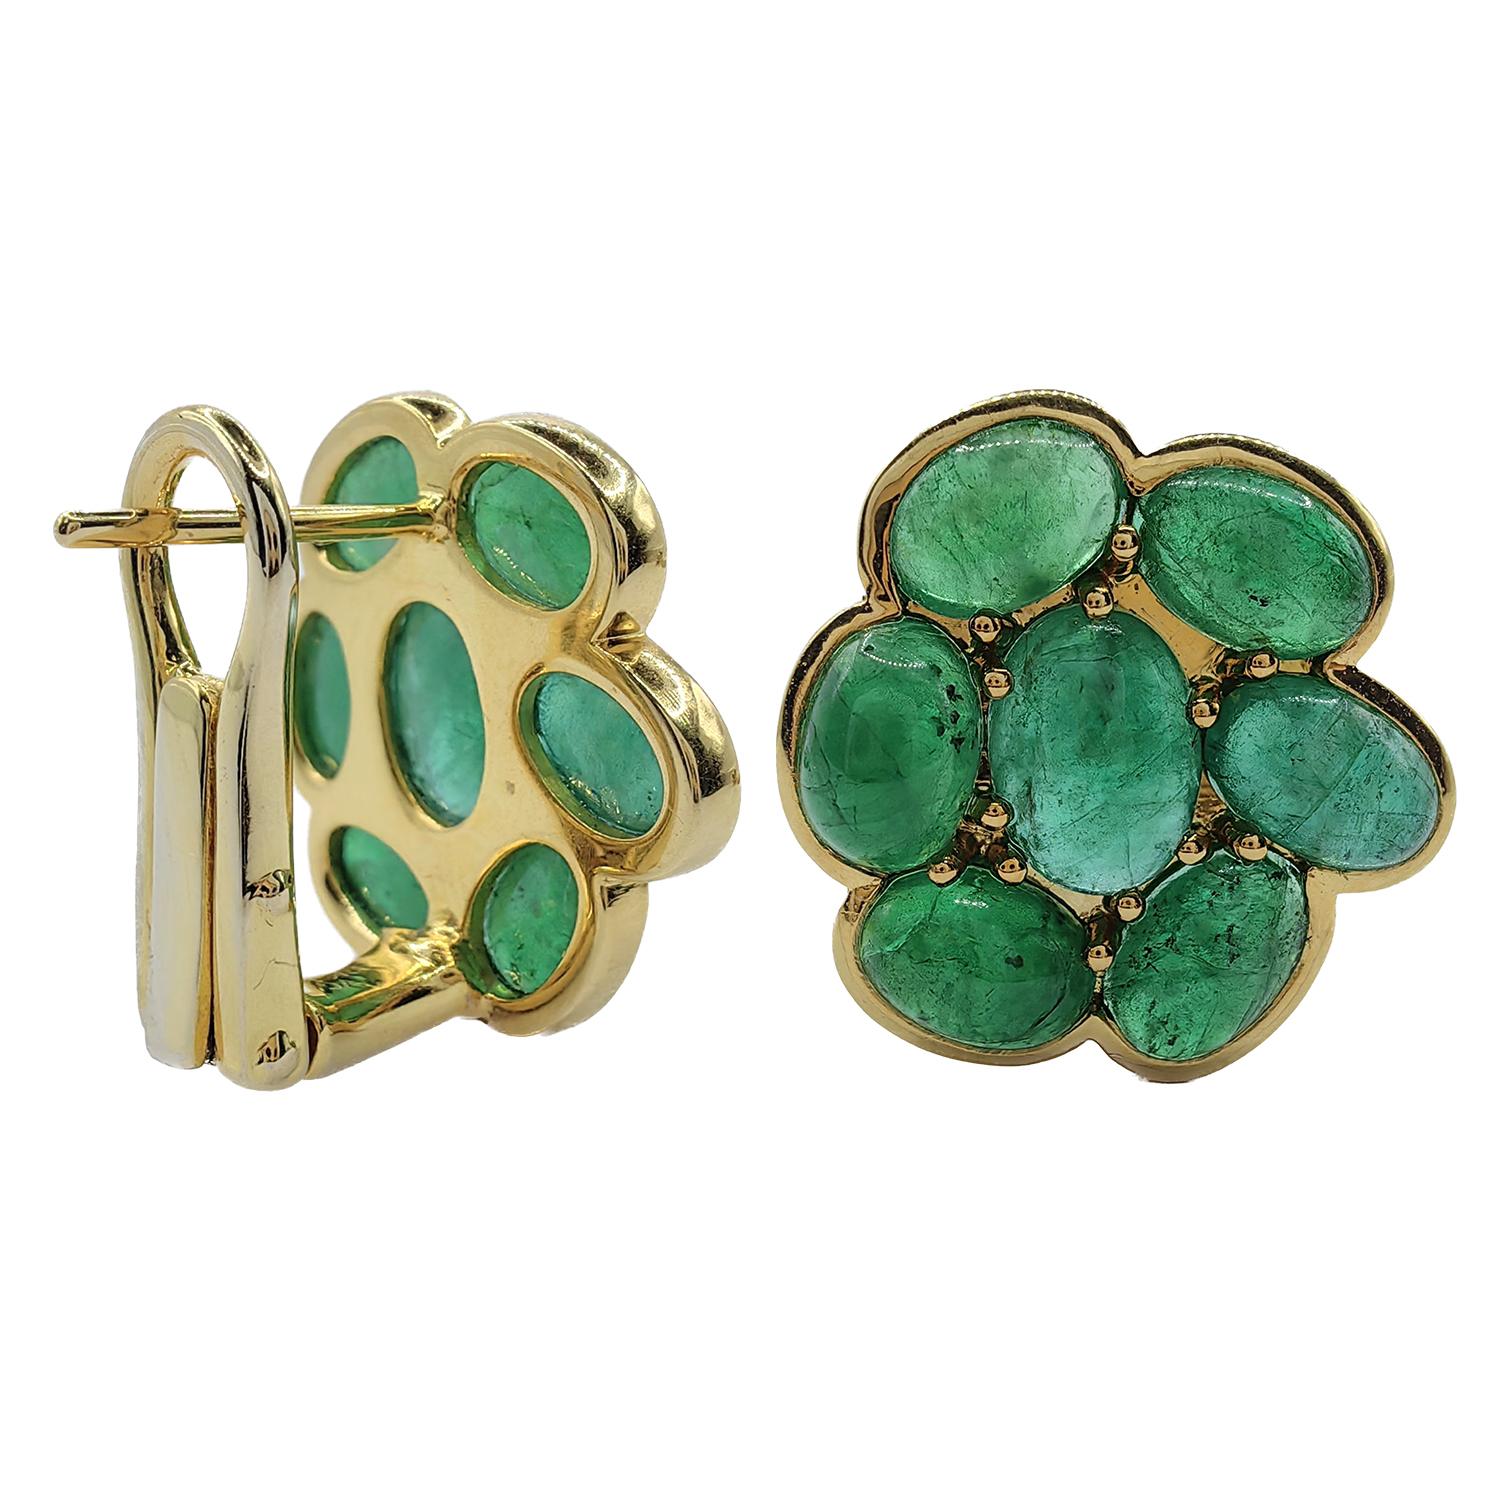 Introducing our stunning Cabochon Emerald Cluster Flower Earrings in 18K Yellow Gold. These exquisite earrings feature a cluster of handpicked cabochon-cut emeralds, totaling approximately 8 carats per pair, set in a beautiful 18K yellow gold